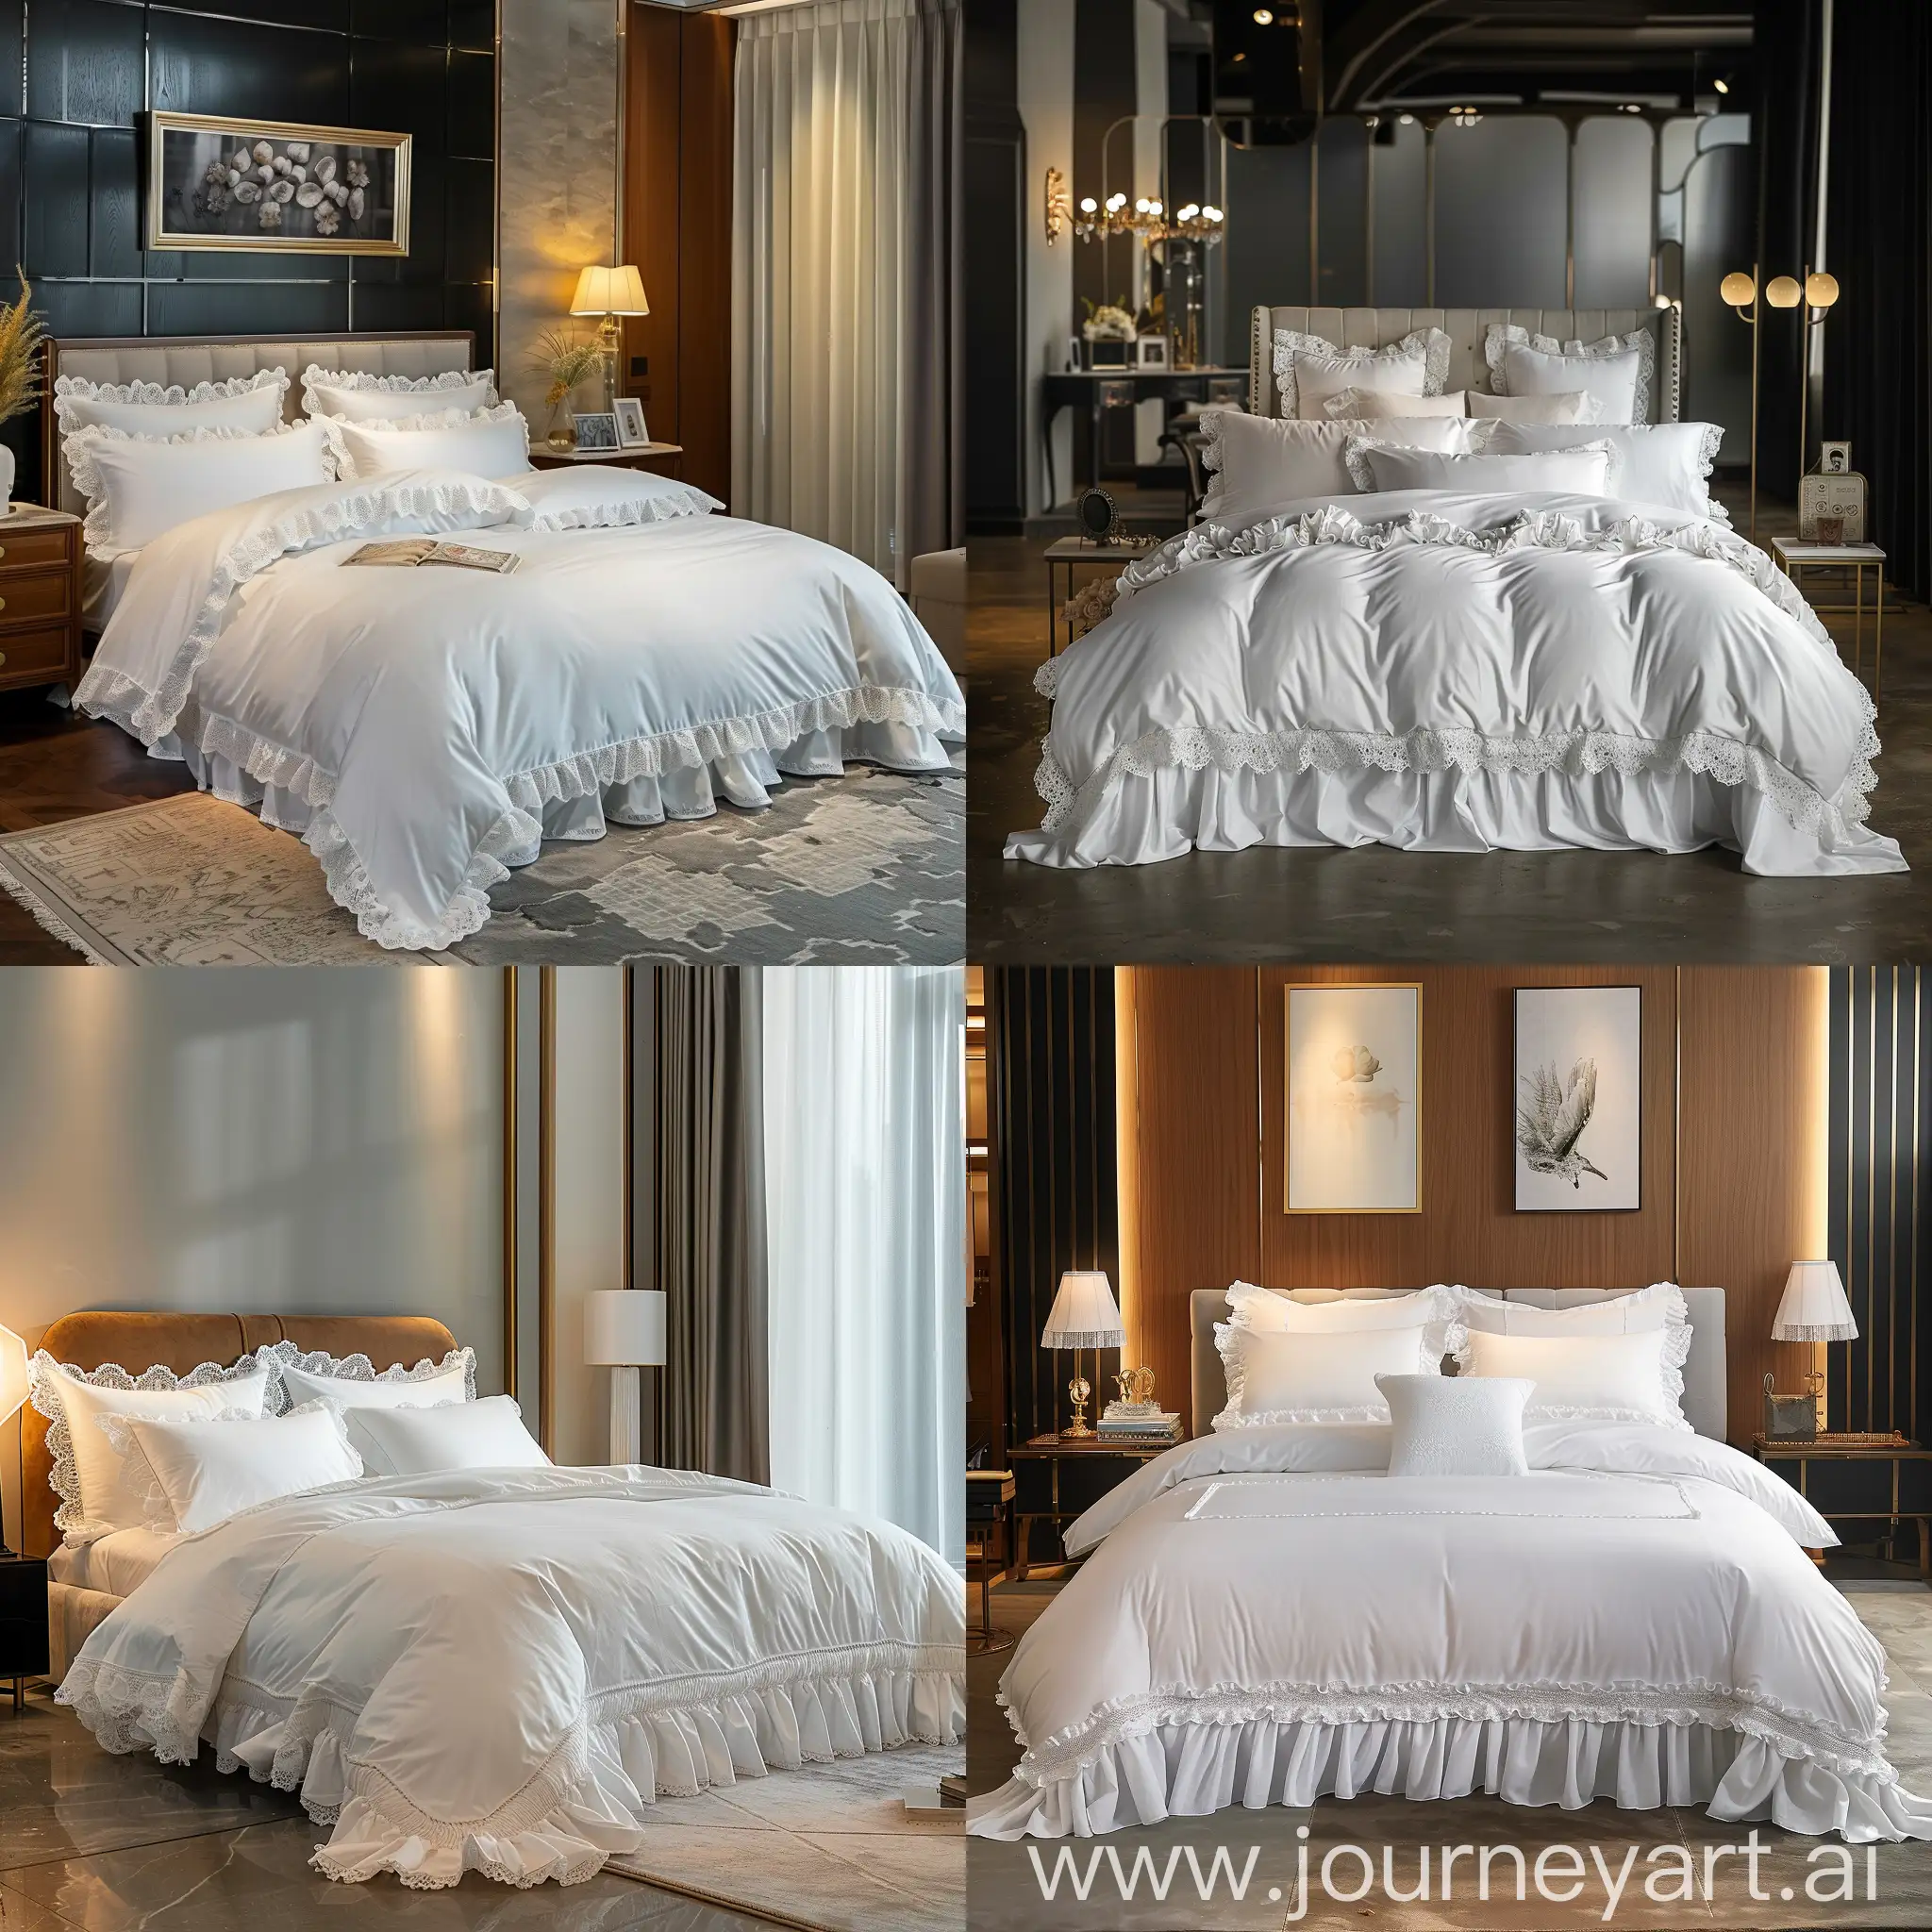 In a spacious bedroom adorned with American-style luxury and refinement, a grand bed sits at the center, dressed in exquisite white bedding that exudes an ethereal romantic vibe, symbolizing a yearning for a beautiful life. The design of each bedding item is thoughtfully curated, blending traditional and modern elements, with the bed skirt featuring delicate lace edges that showcase unparalleled elegance. The duvet cover and bed skirt are made from soft, pure cotton, while the pillowcase's ruffled edge adds a touch of softness and delicacy, highlighting its unique charm.

The room is illuminated with soft and cozy lighting, rendering every detail through high-definition pixel technology to make the space look more realistic and vibrant. It feels as if stepping out of a movie scene, imbued with a cinematic beauty that transports you into a story that is both modern and romantic. The layout and design details of the bedroom have been carefully planned to ensure that every aspect reflects the luxury and finesse of the American decorating style.